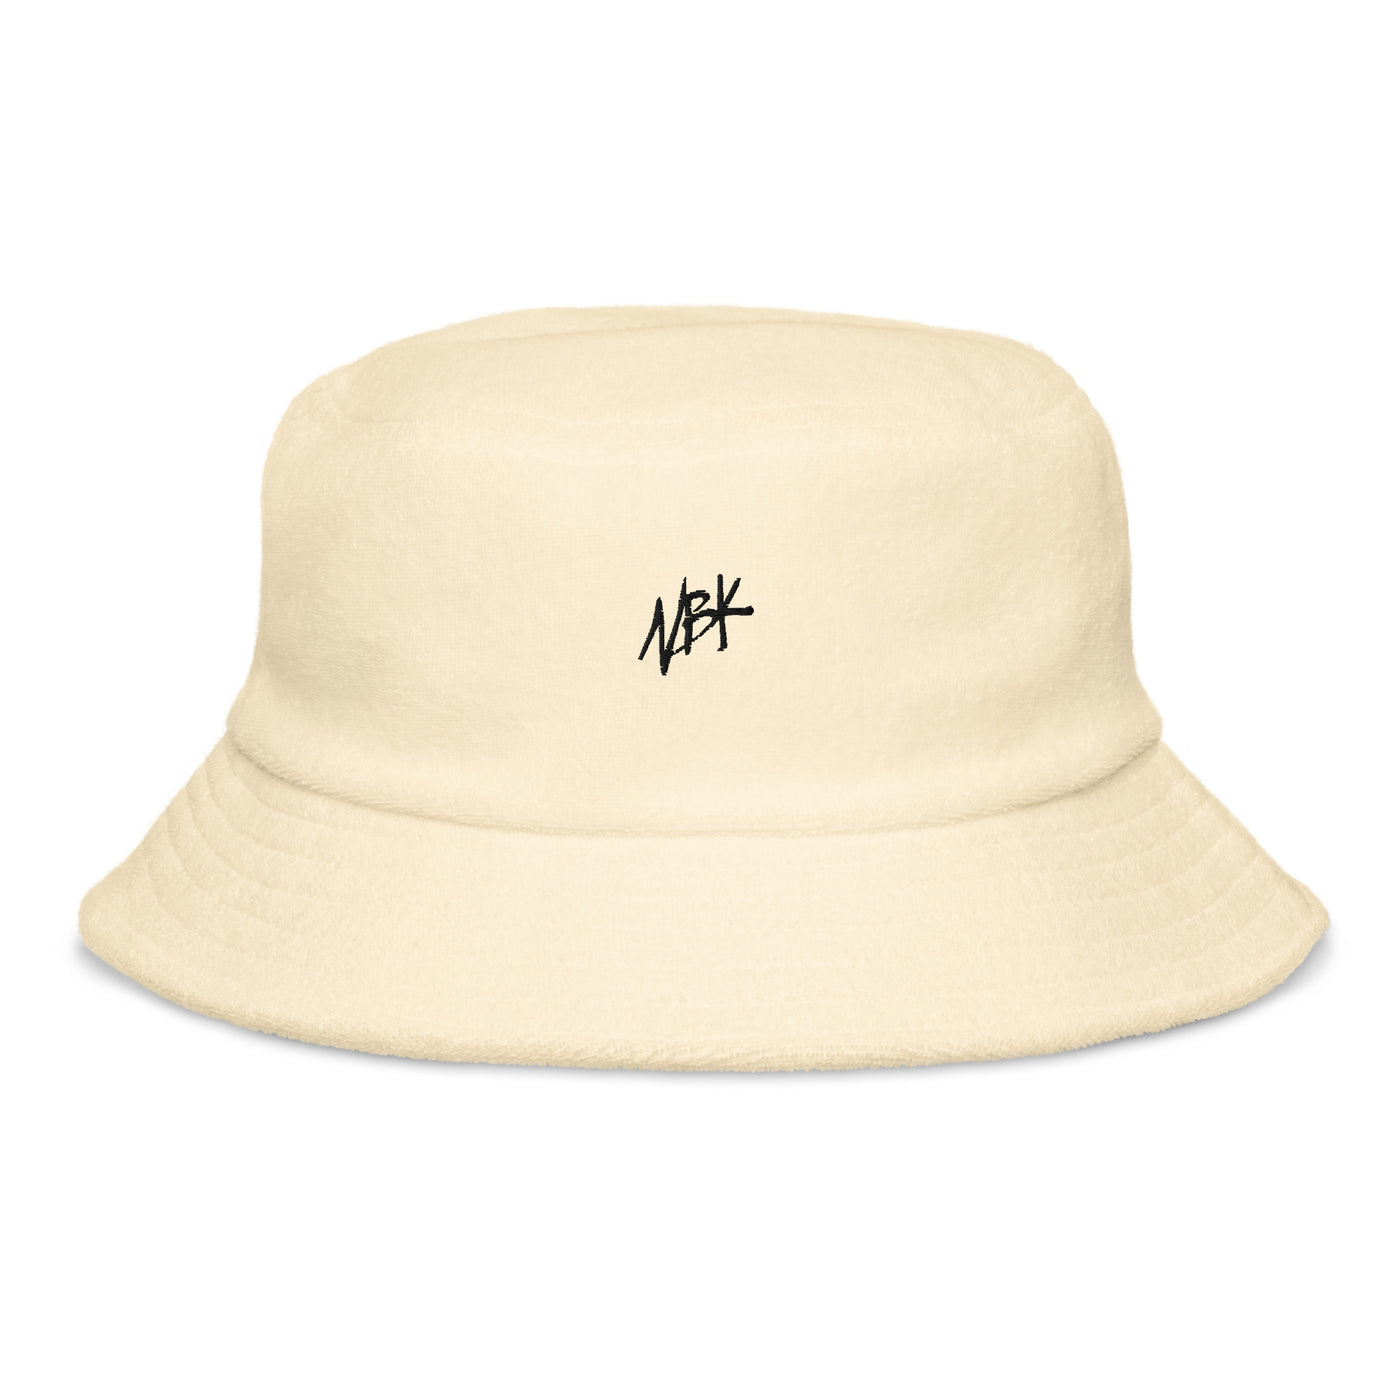 THE TERRY CLOTH BUCKET HAT